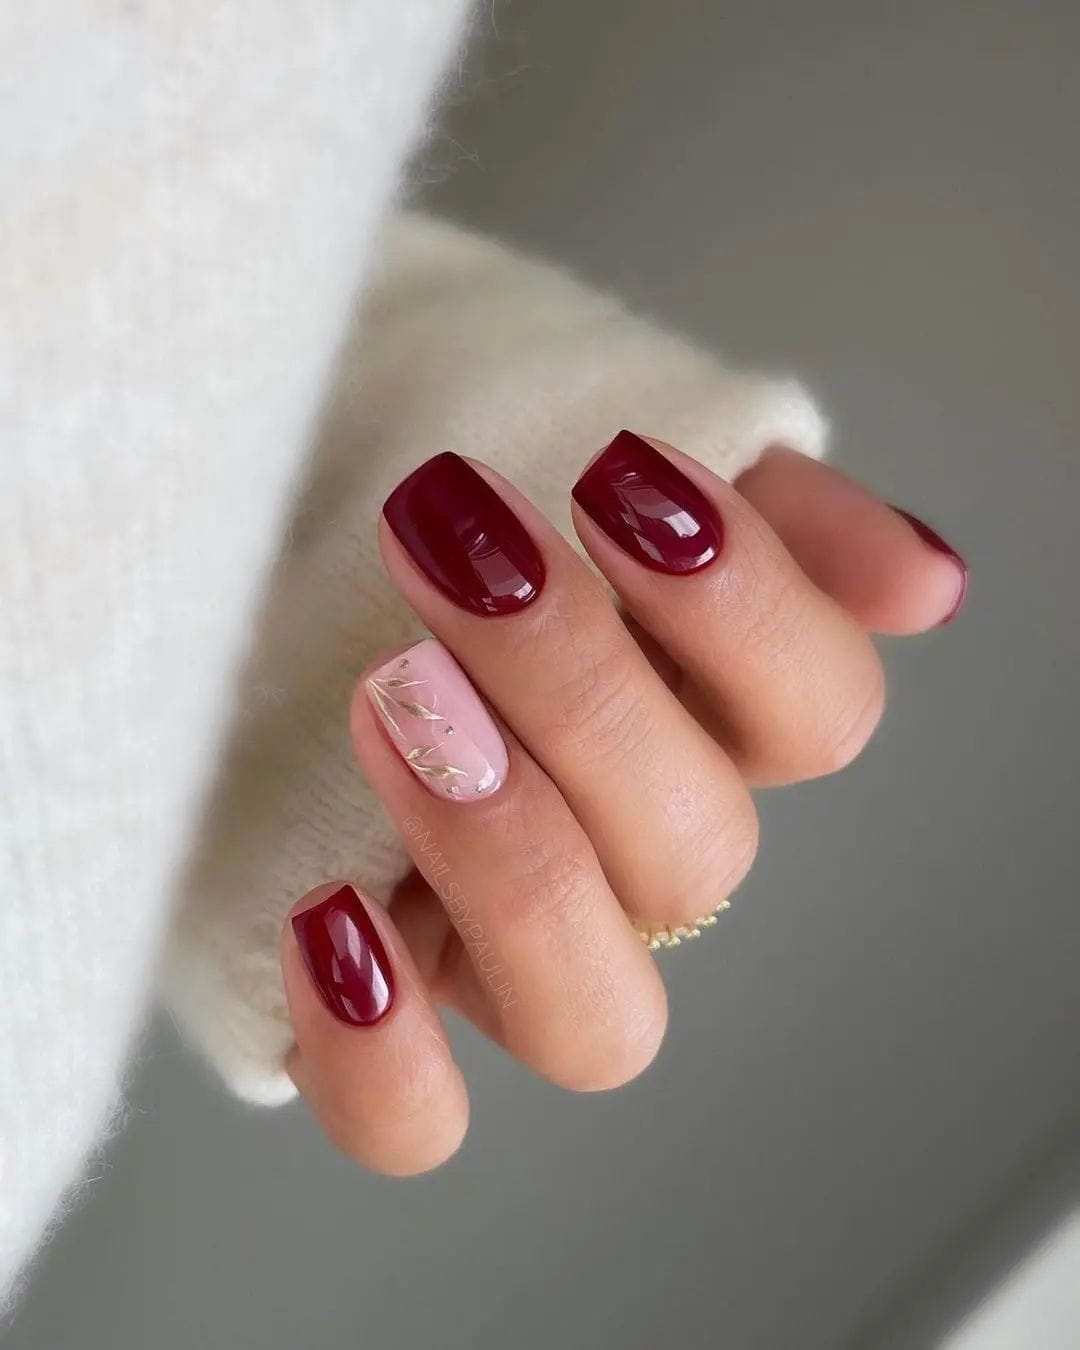 100+ Best Winter Nail Ideas And Designs To Try images 50